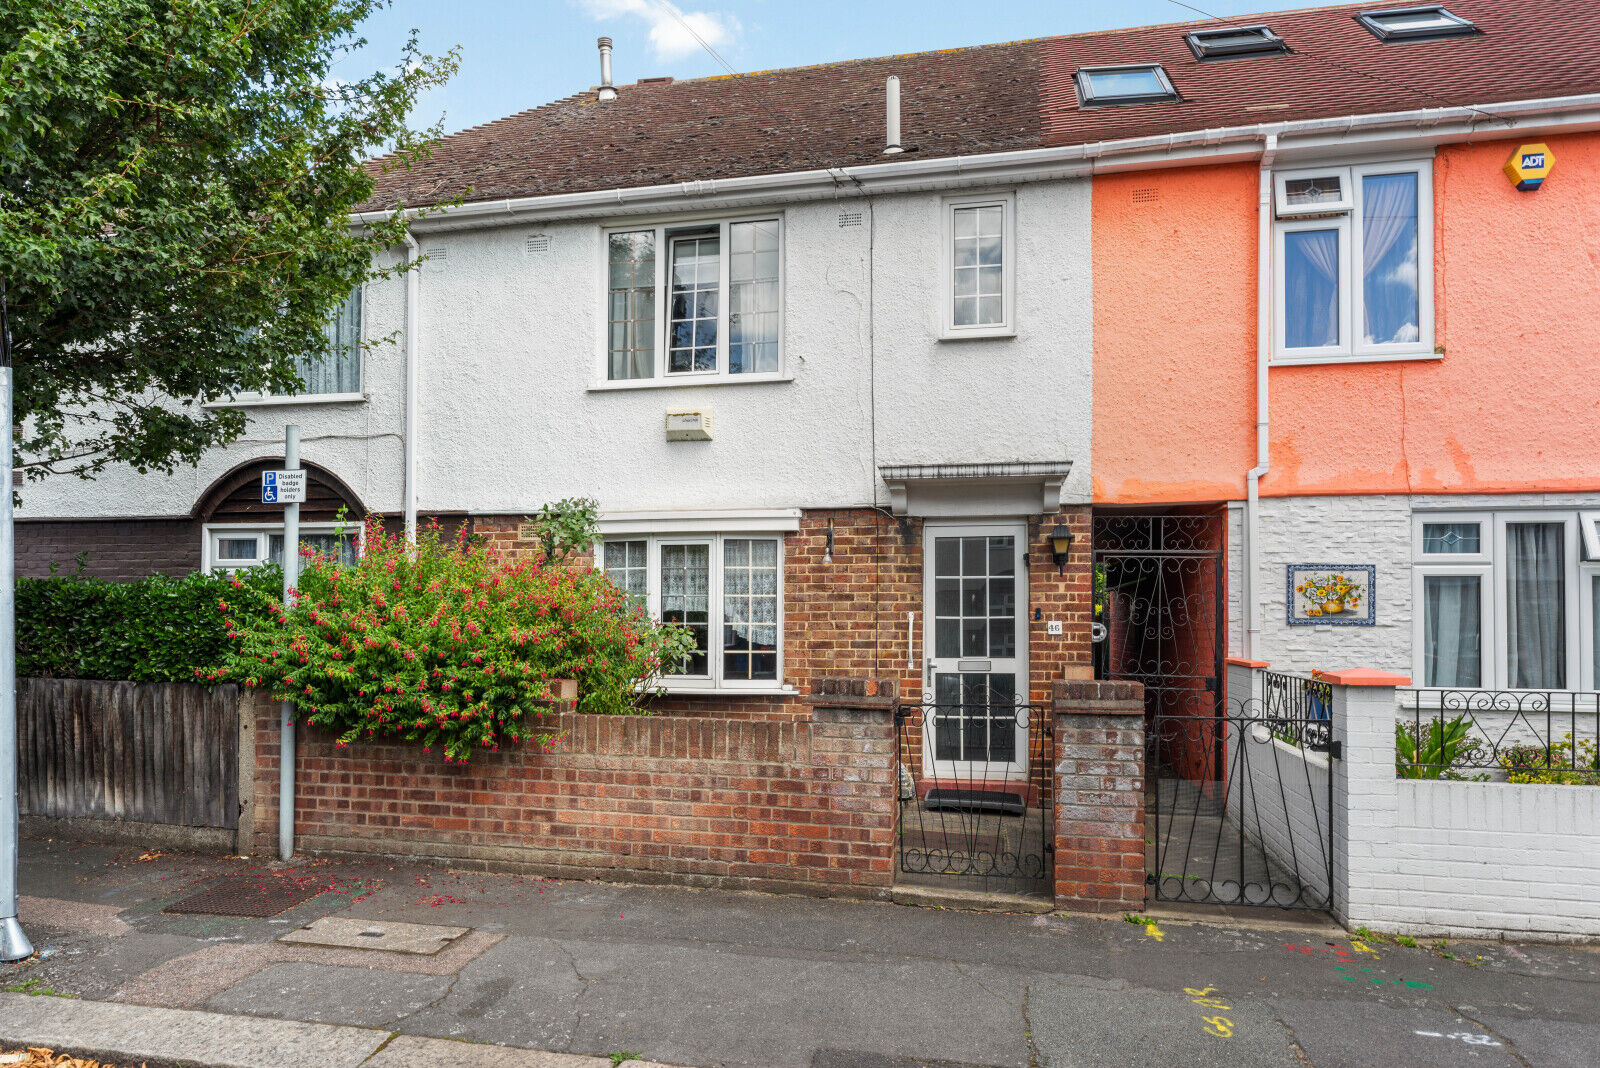 2 bedroom mid terraced house for sale Edmund Road, Mitcham, CR4, main image